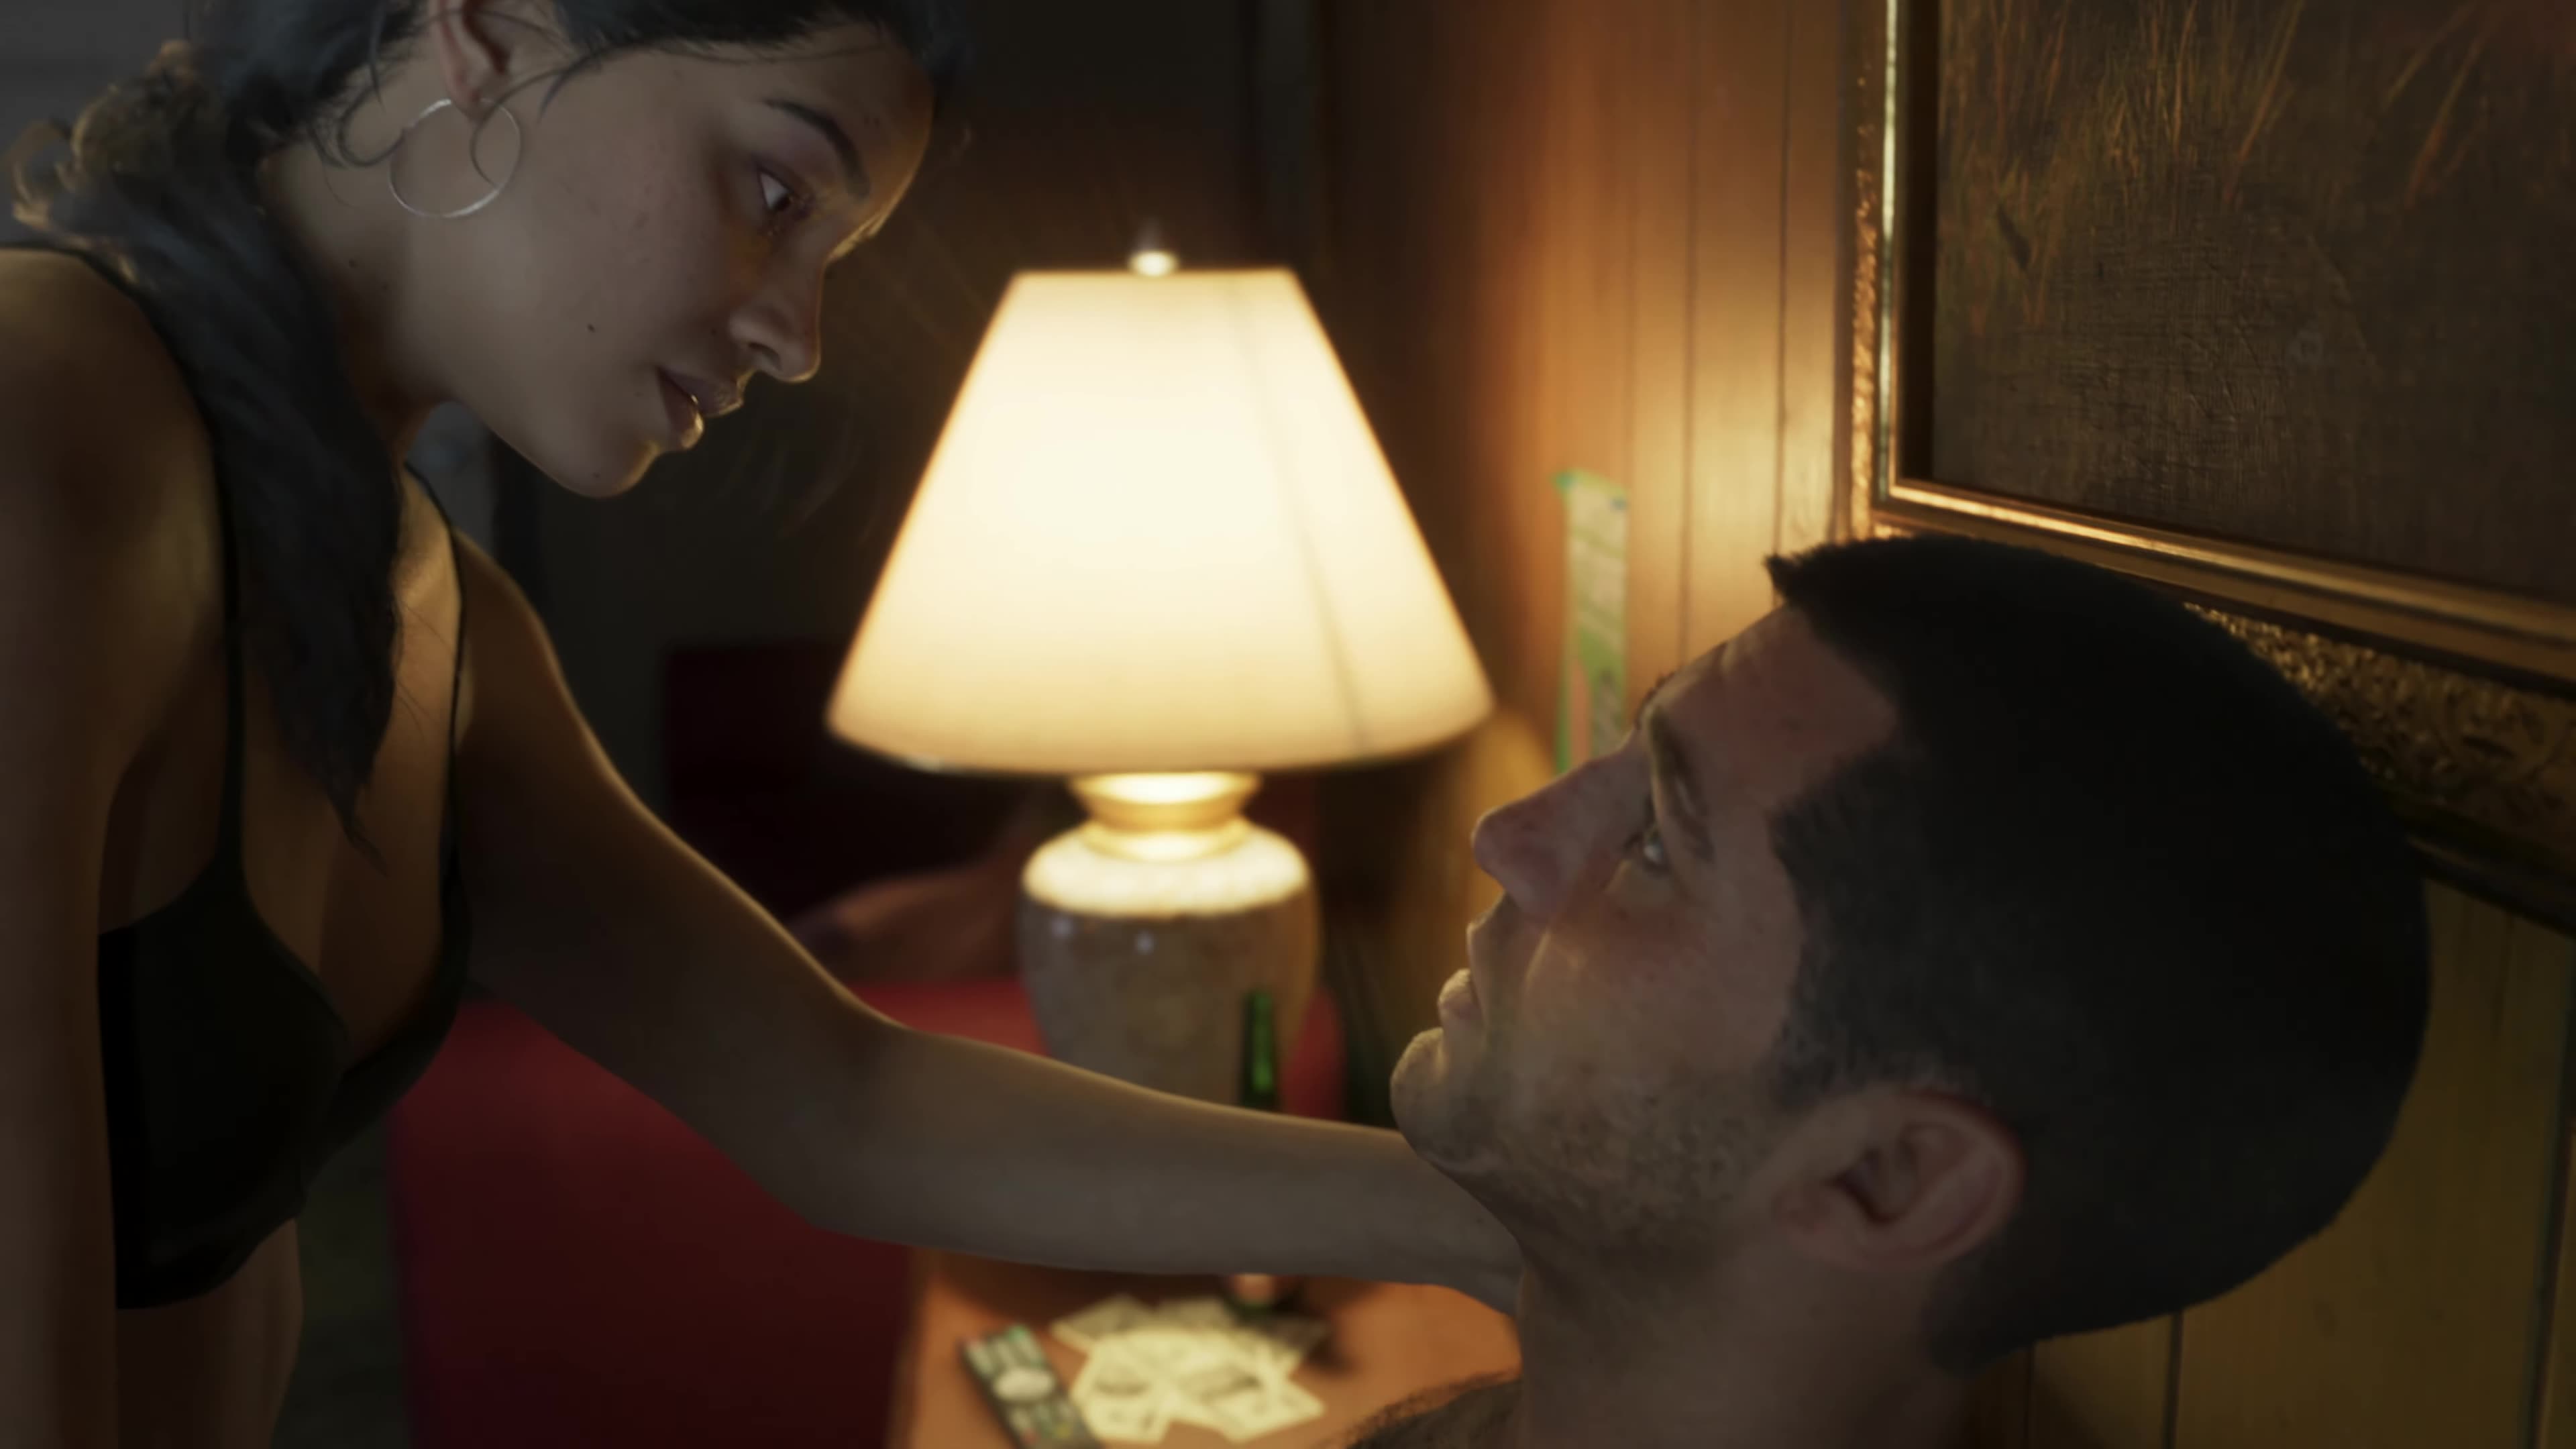 GTA 6 Fan Proposes Incredible Relationship Feature Idea for Protagonists  Lucia and Jason - EssentiallySports